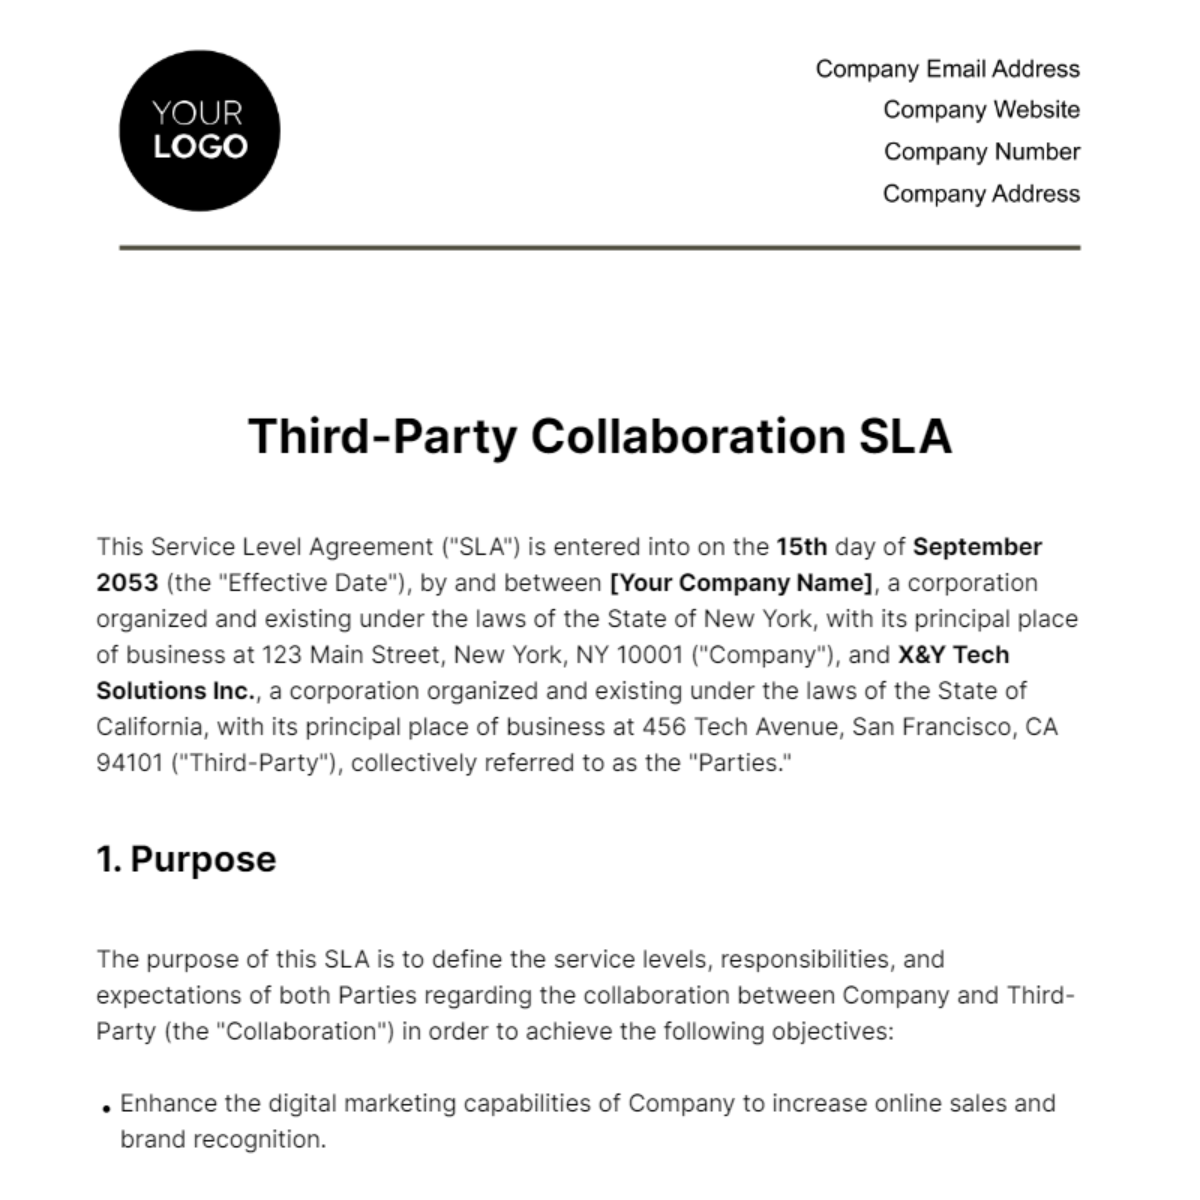 Third-Party Collaboration SLA HR Template